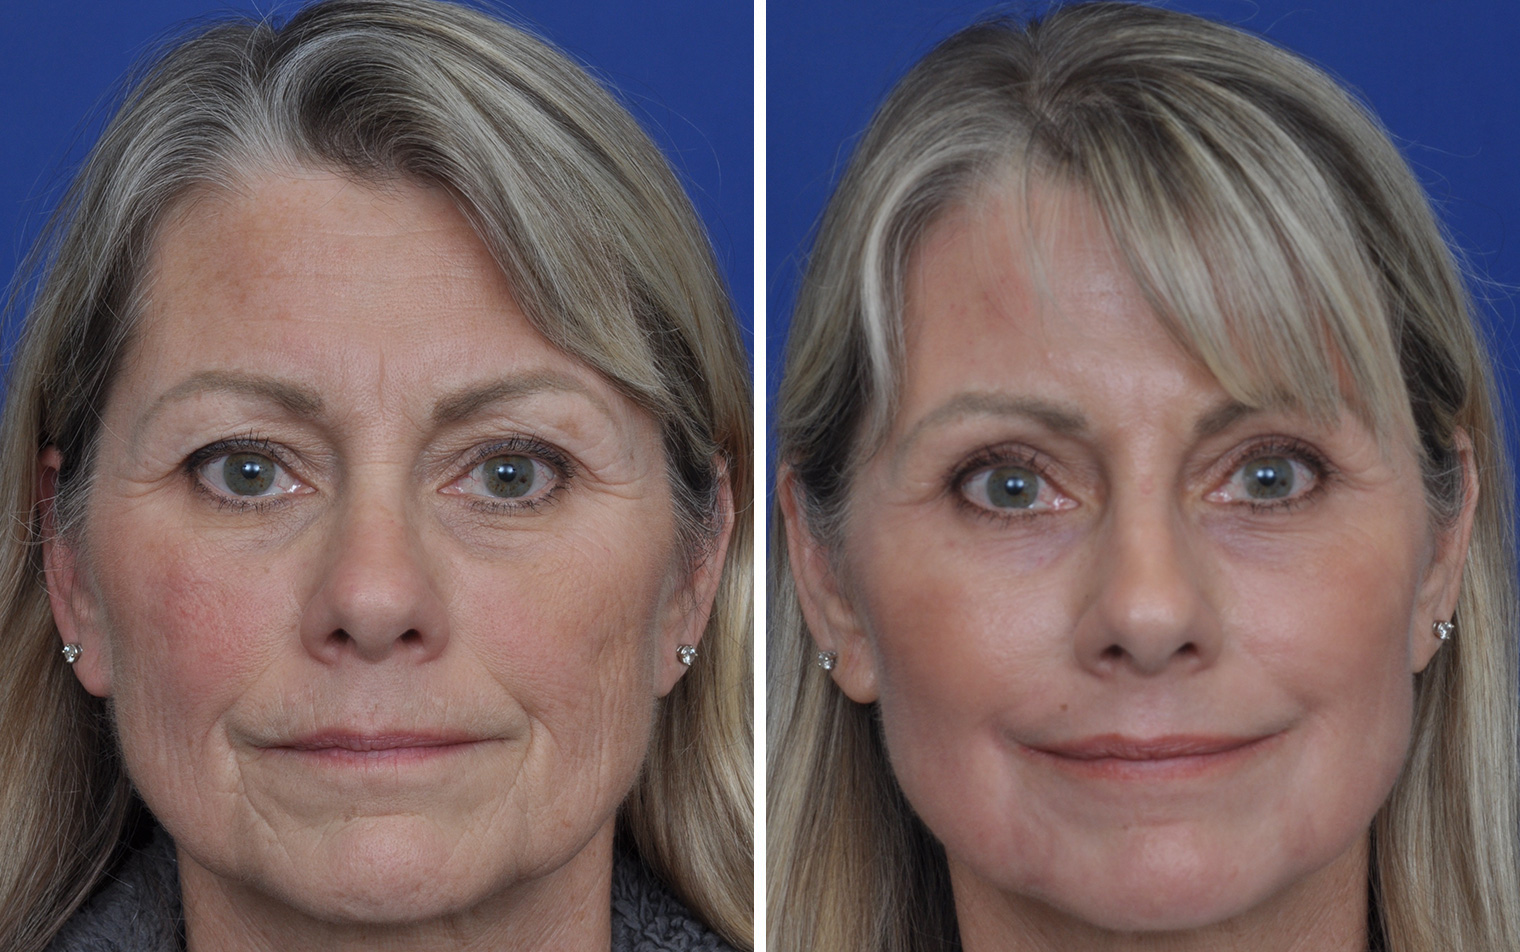 upper eyelid surgery before and after